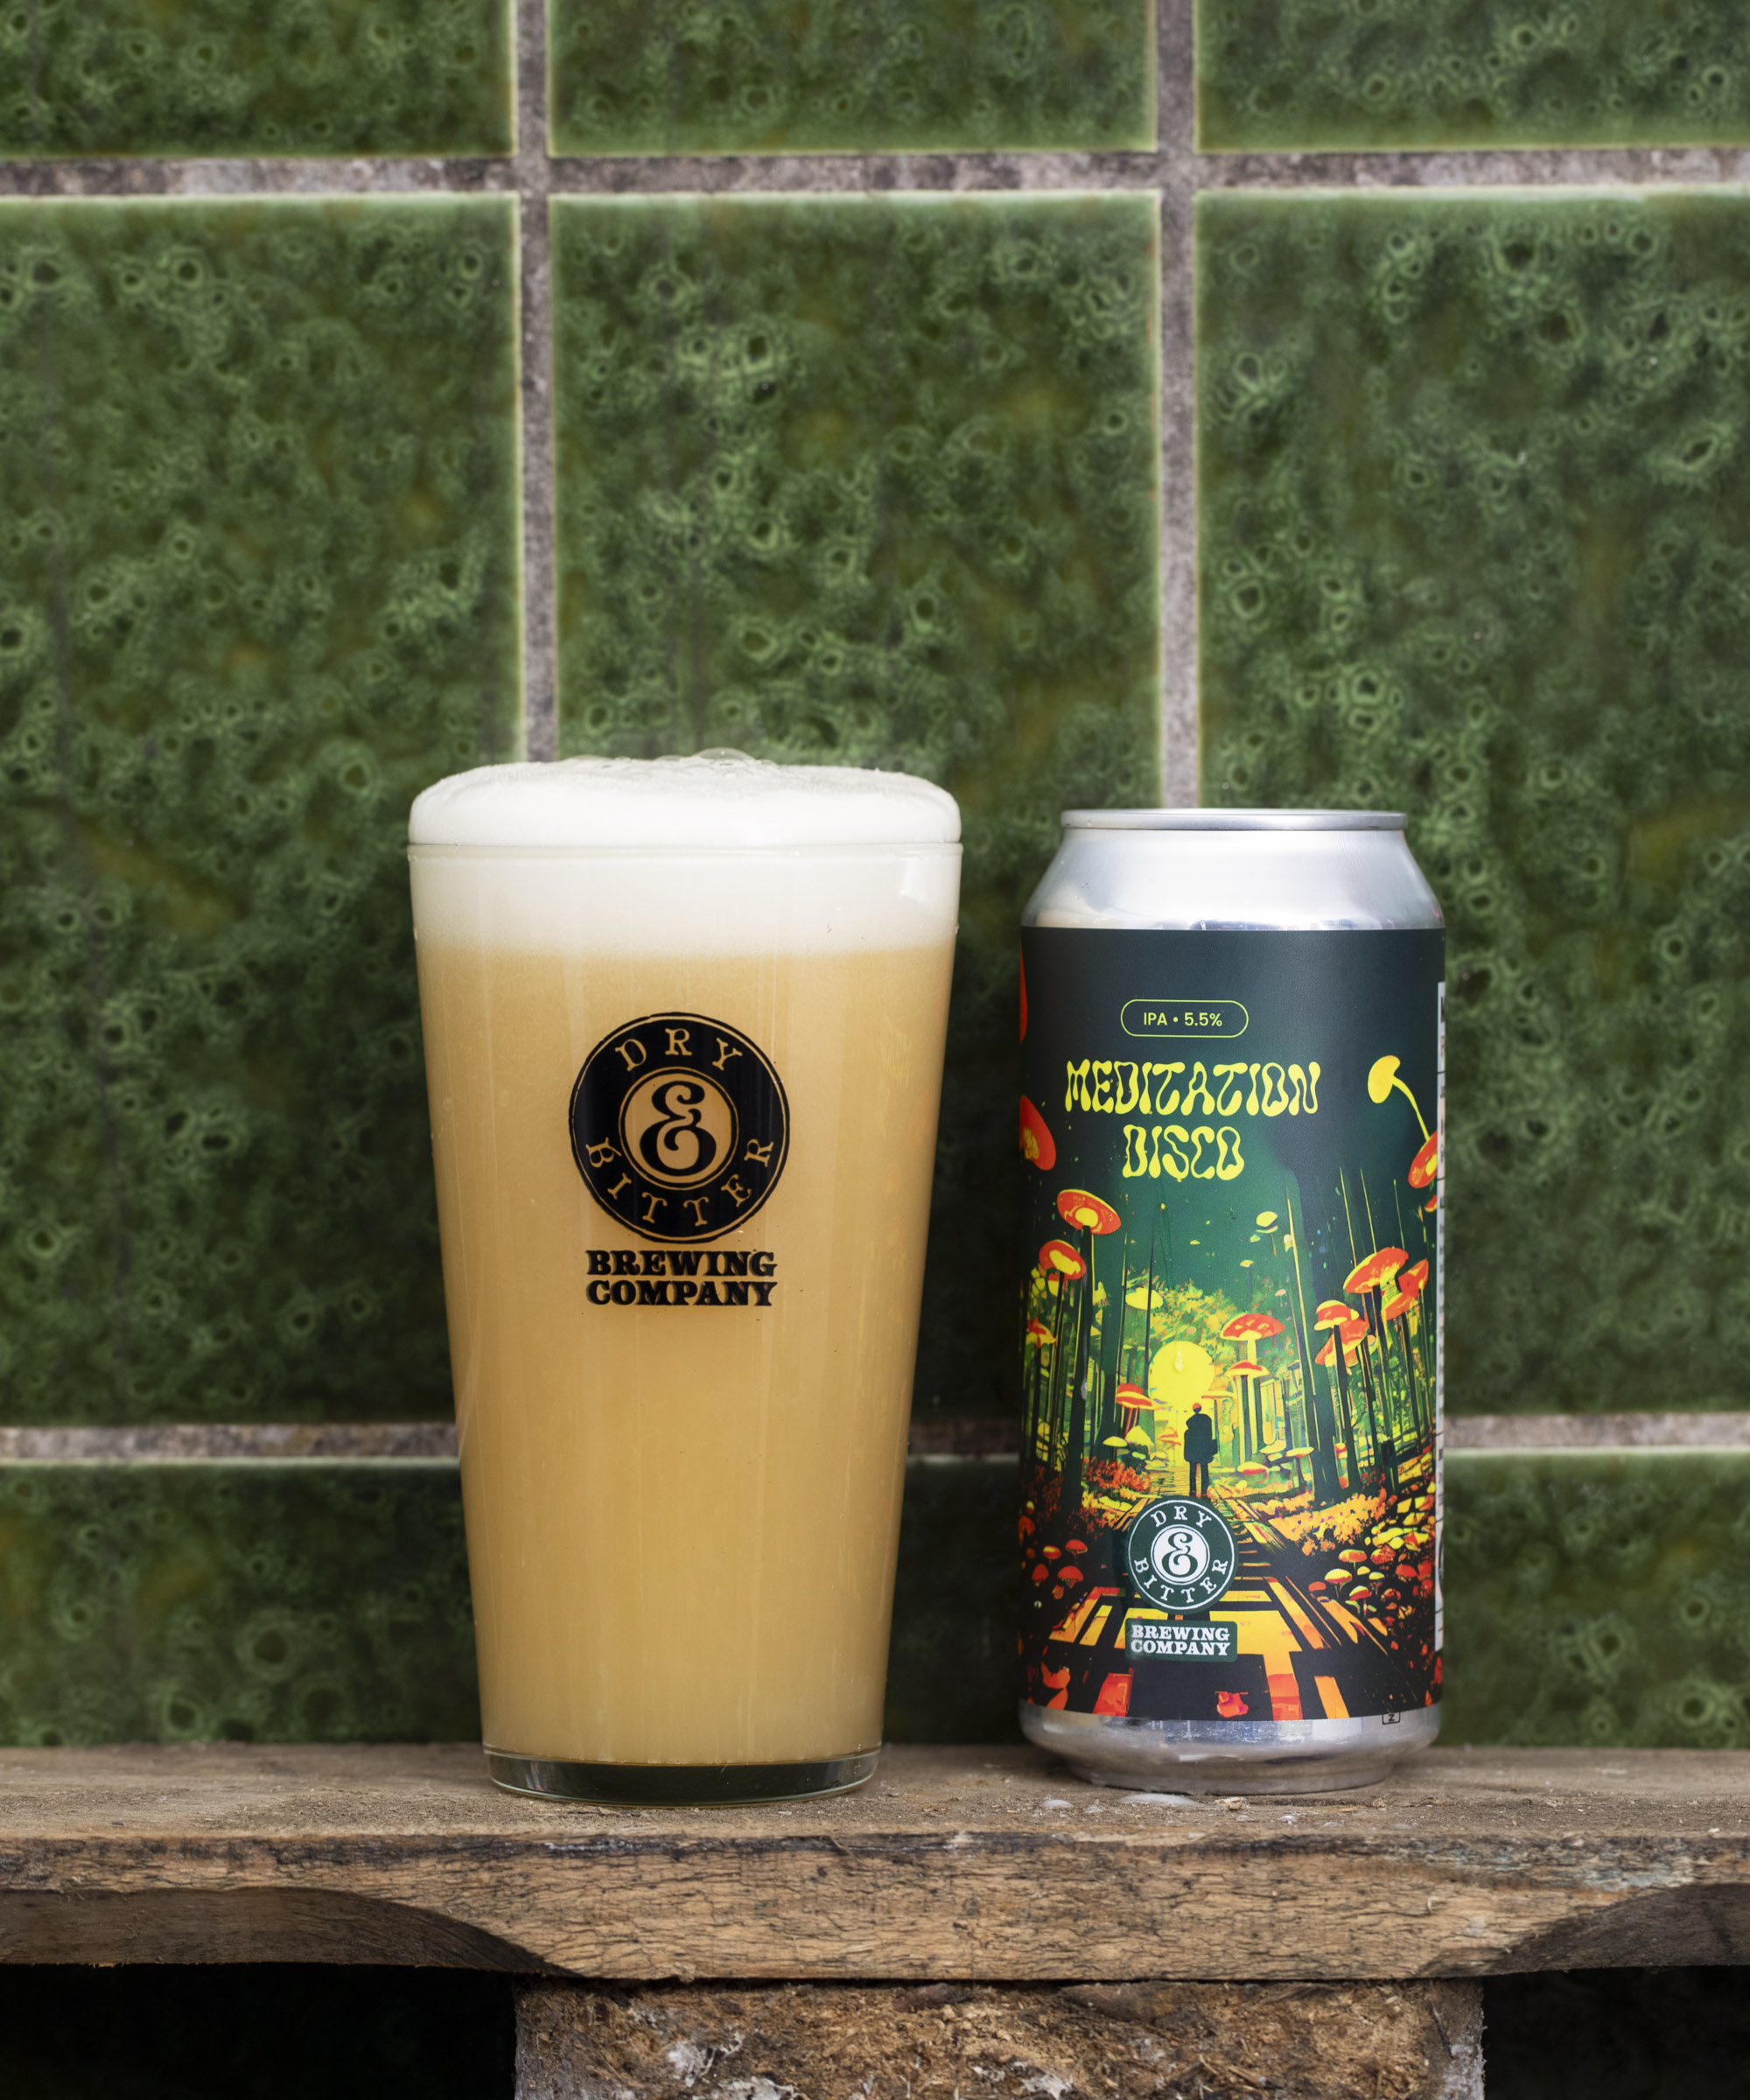 Pick whatever you like at the Dry & Bitter pop-up shops in Islands Brygge and Vesterbro – Fill up your fridge with cans of world-class, freshly brewed beer